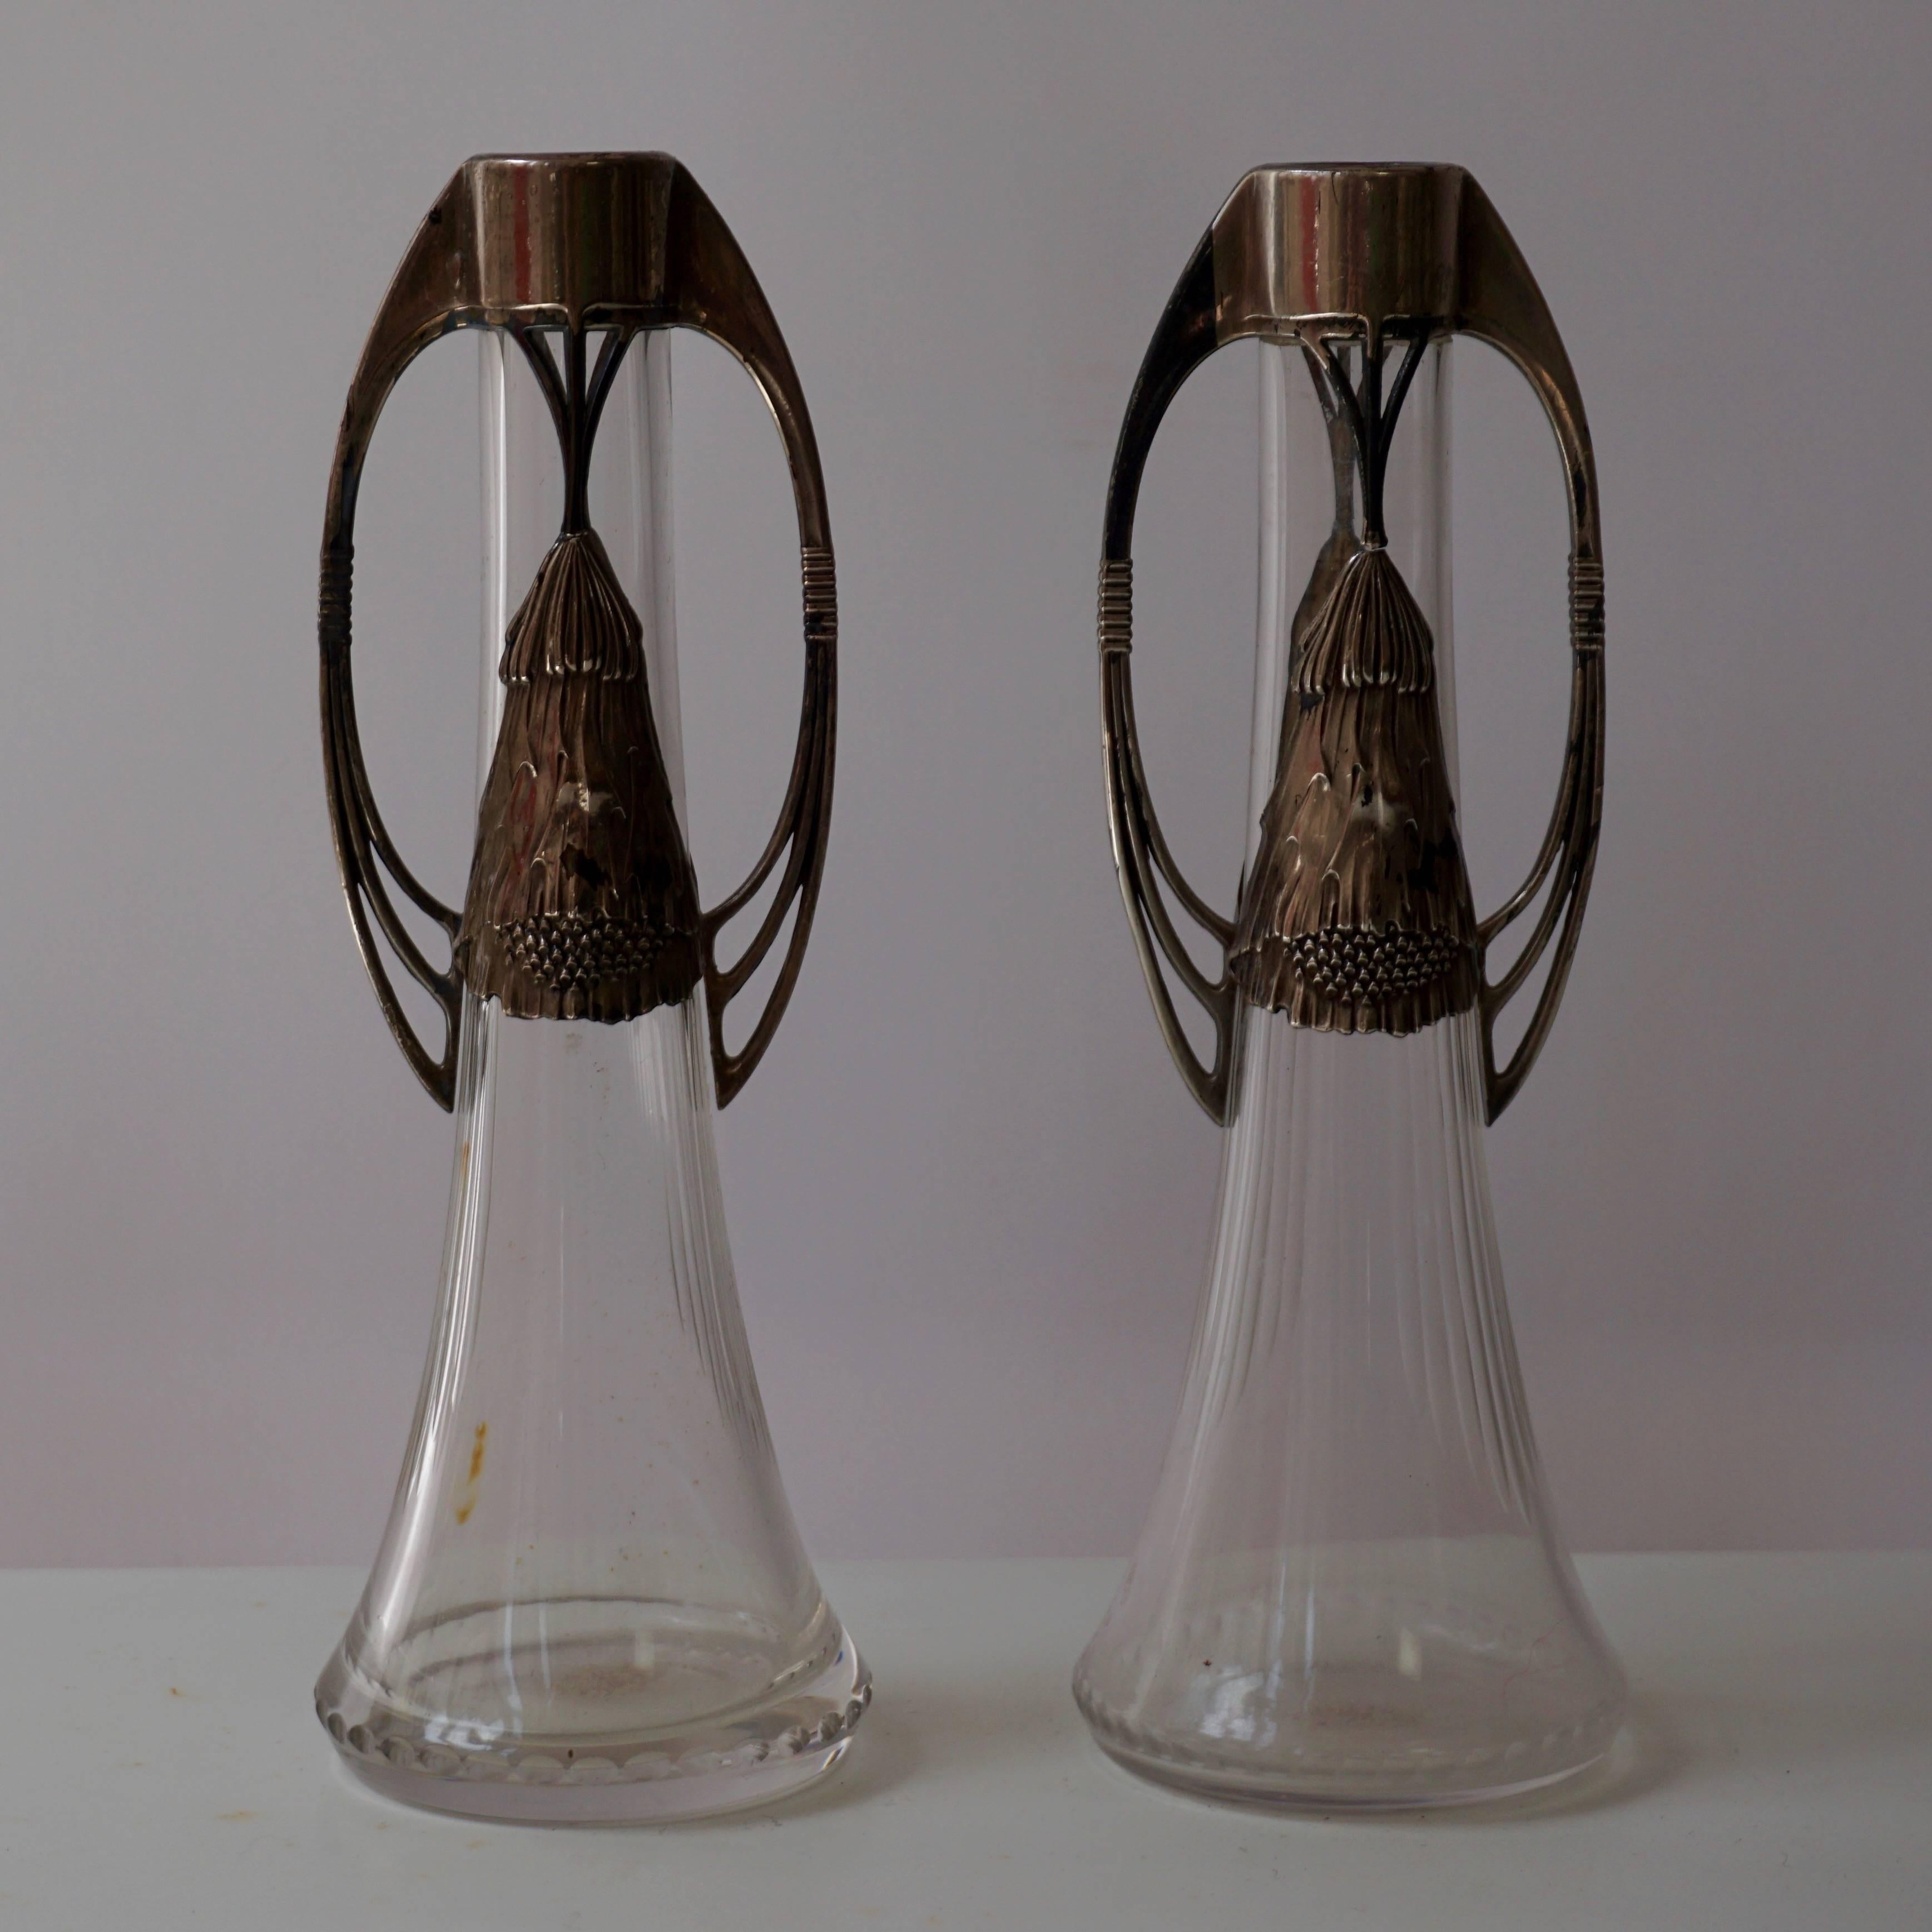 A pair of WMF Art Nouveau silver plated vases with decoration and original glass liners.